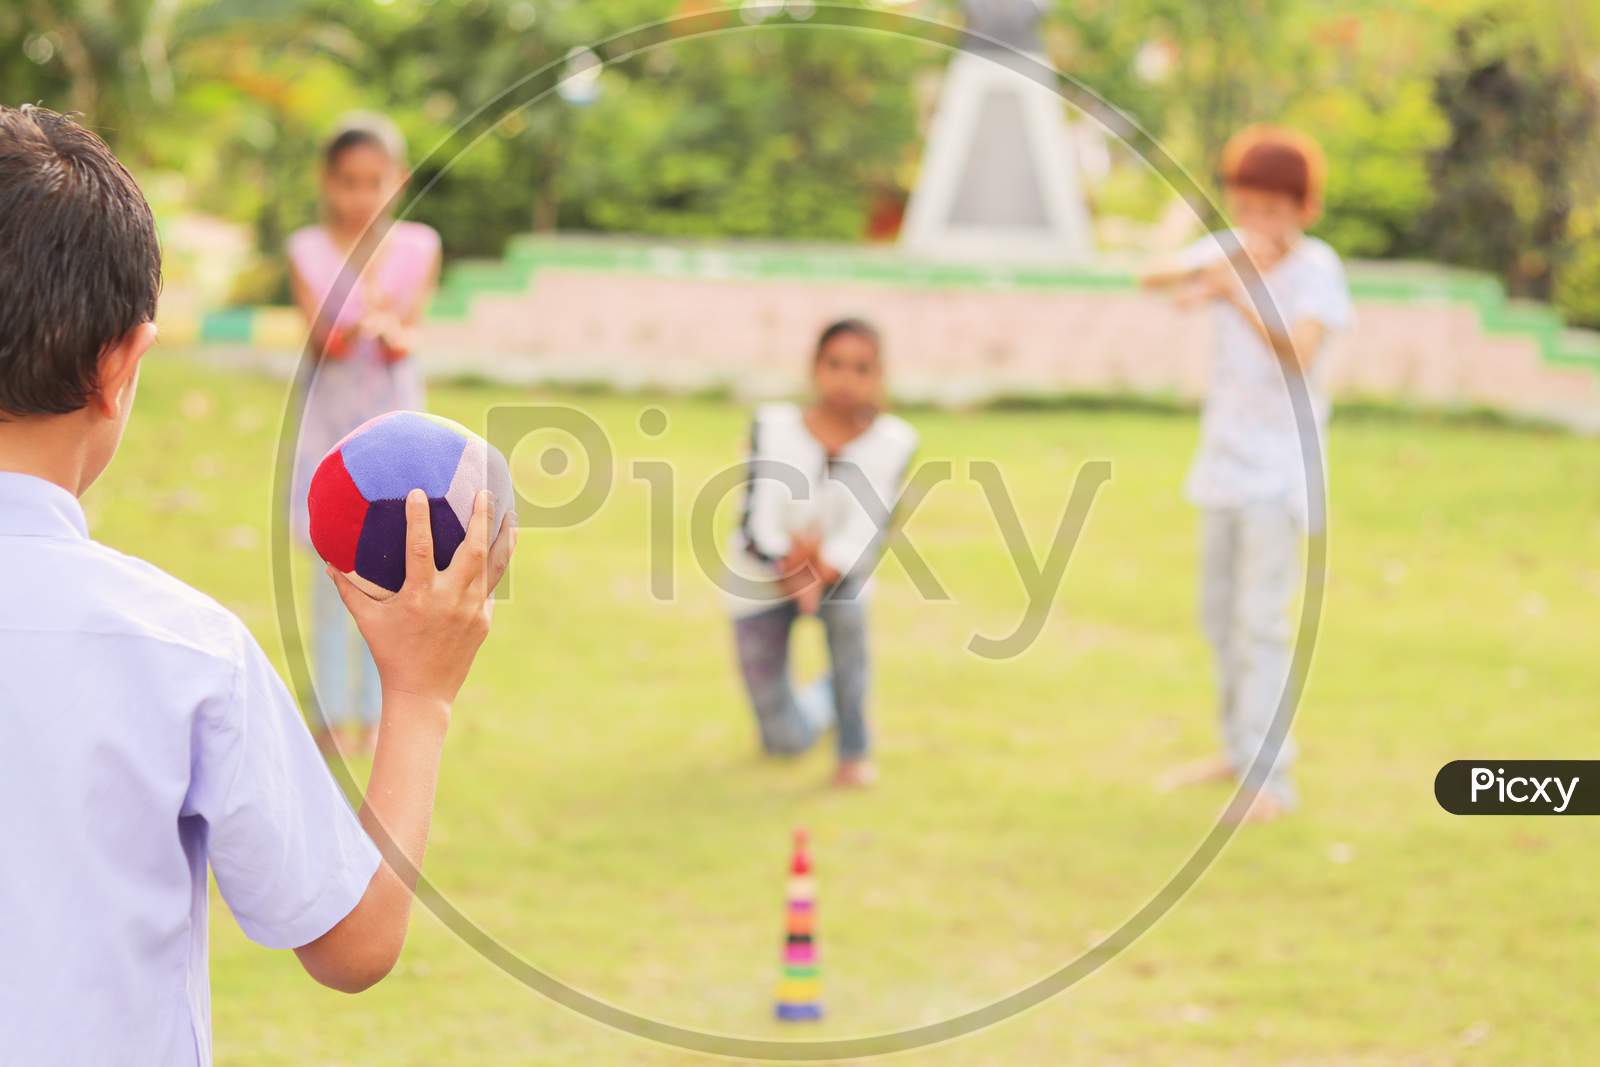 Children's Playing Games At Park, Outdoor - Kids Playing Traditional Games Outside During Leisure.